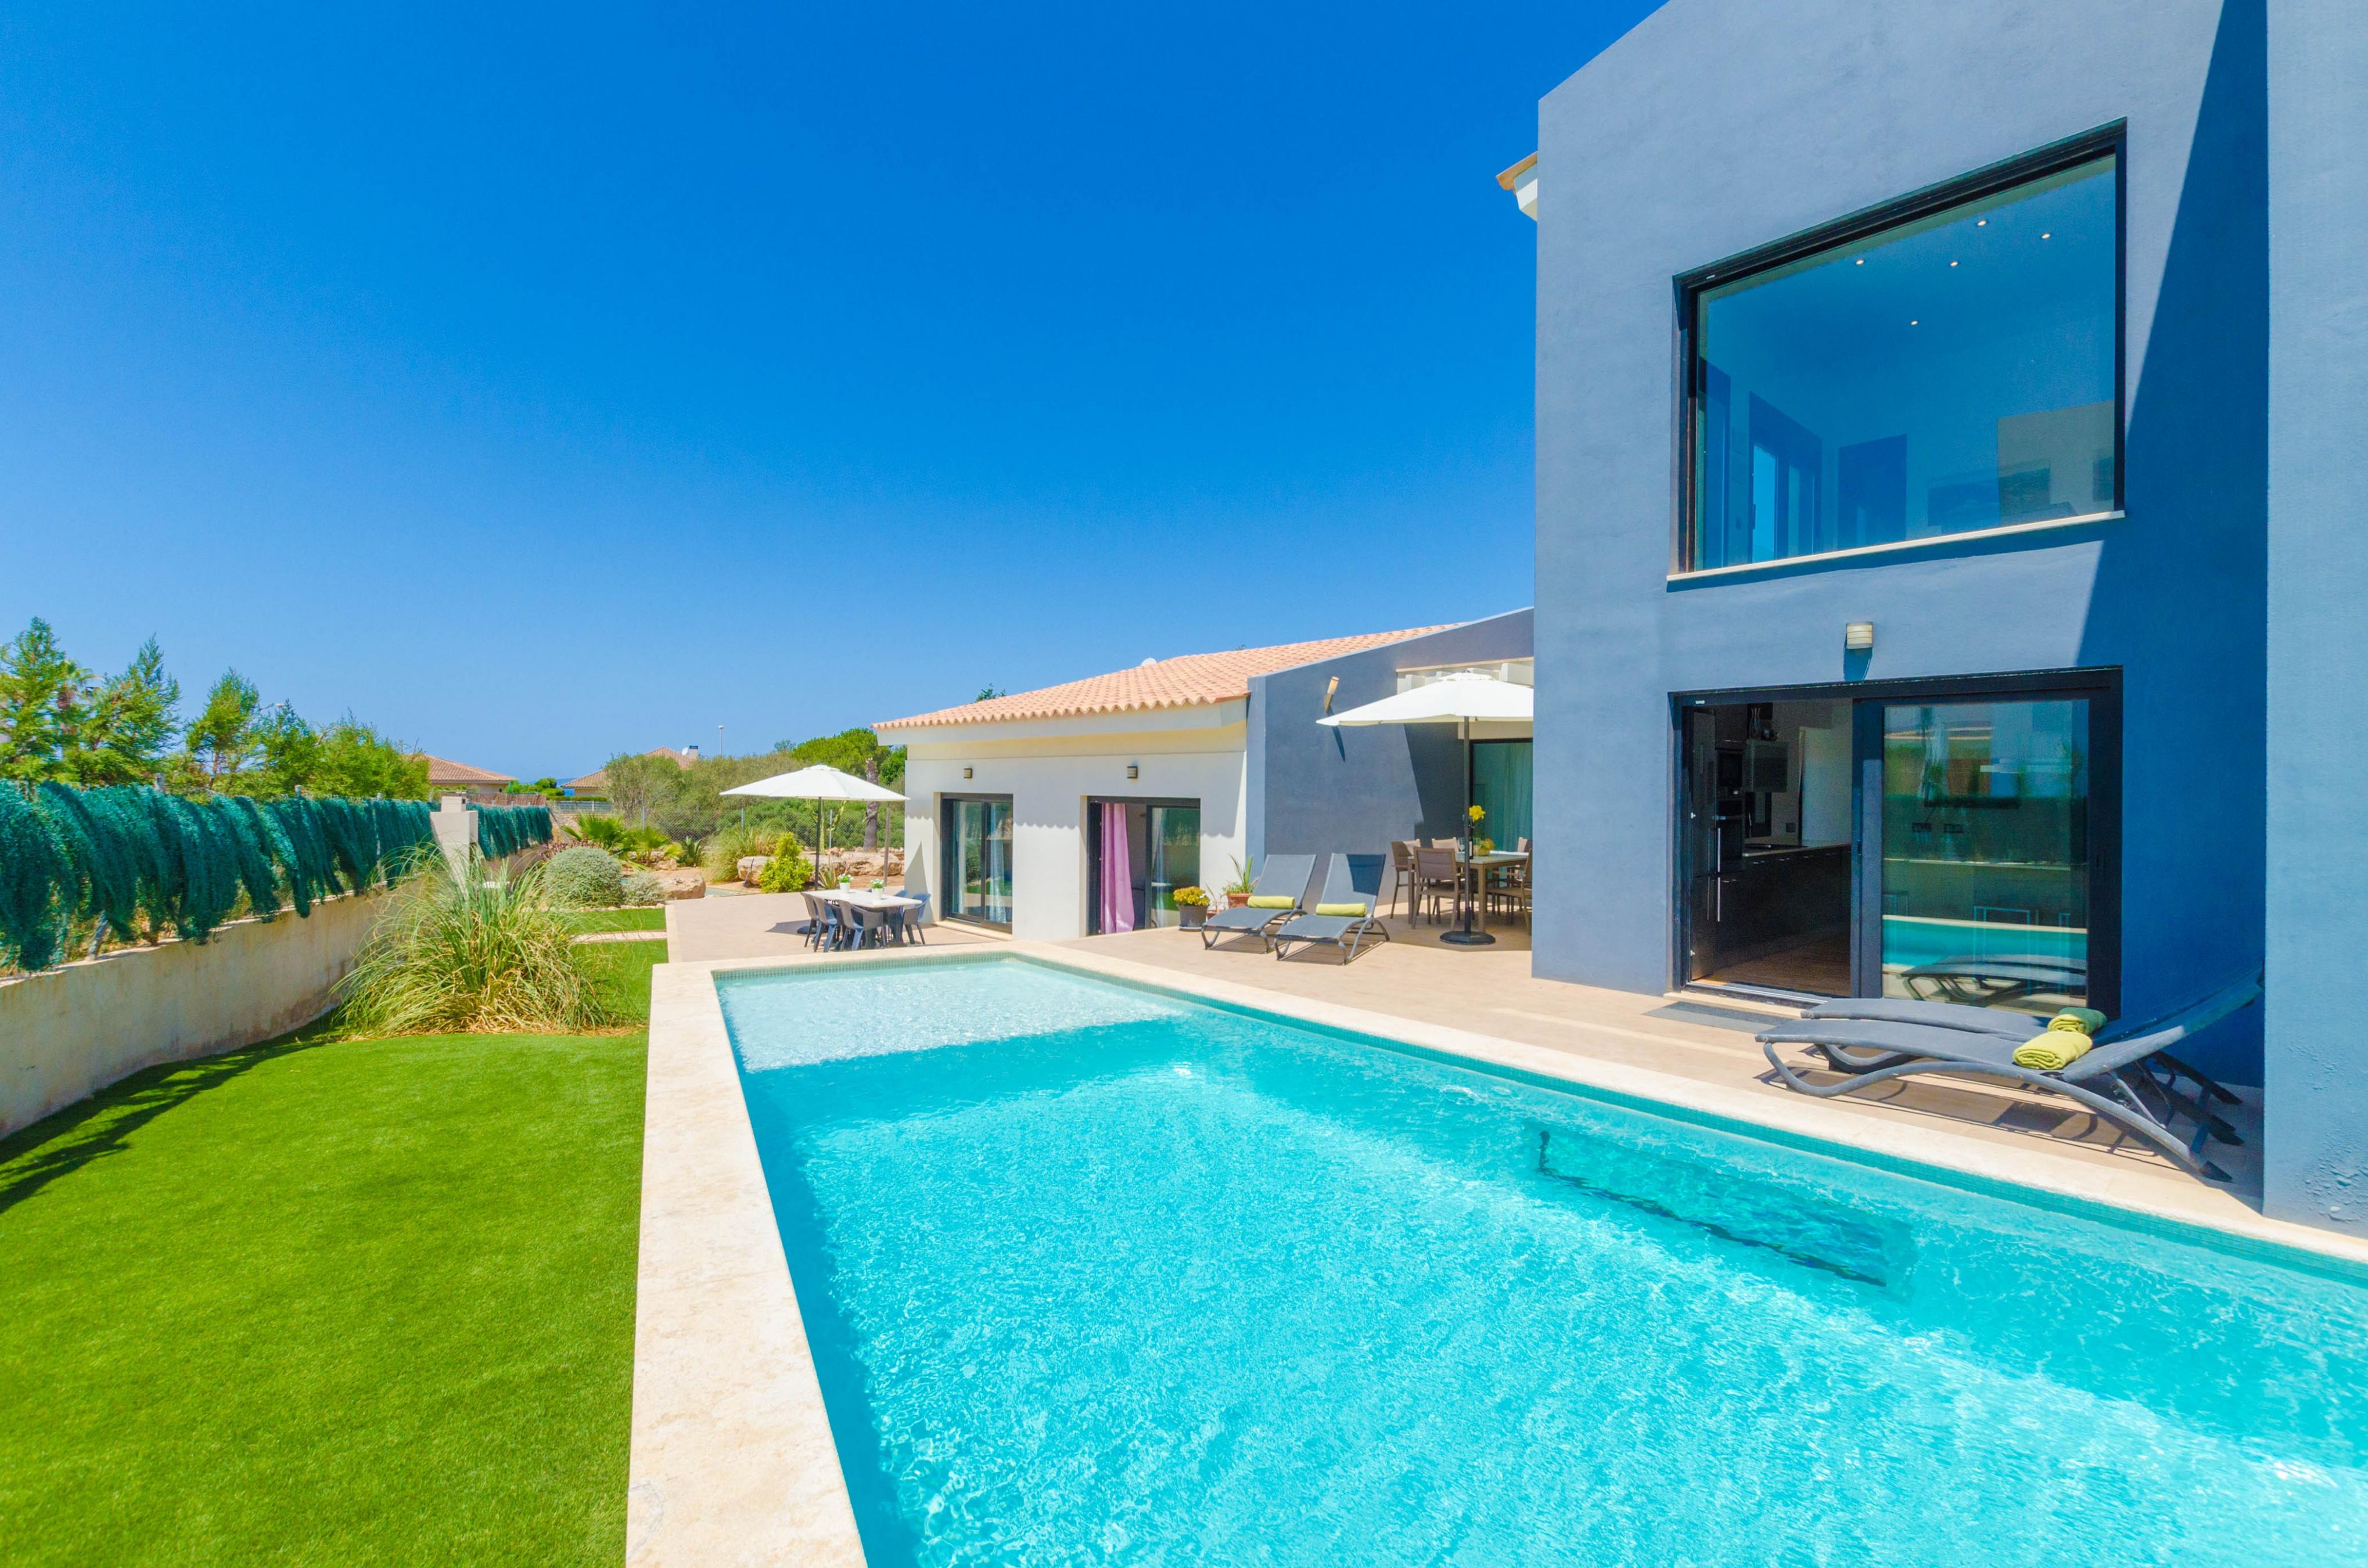 Property Image 2 - LA PRIMERA - Modern chalet with private pool near the golf course. Free WiFi